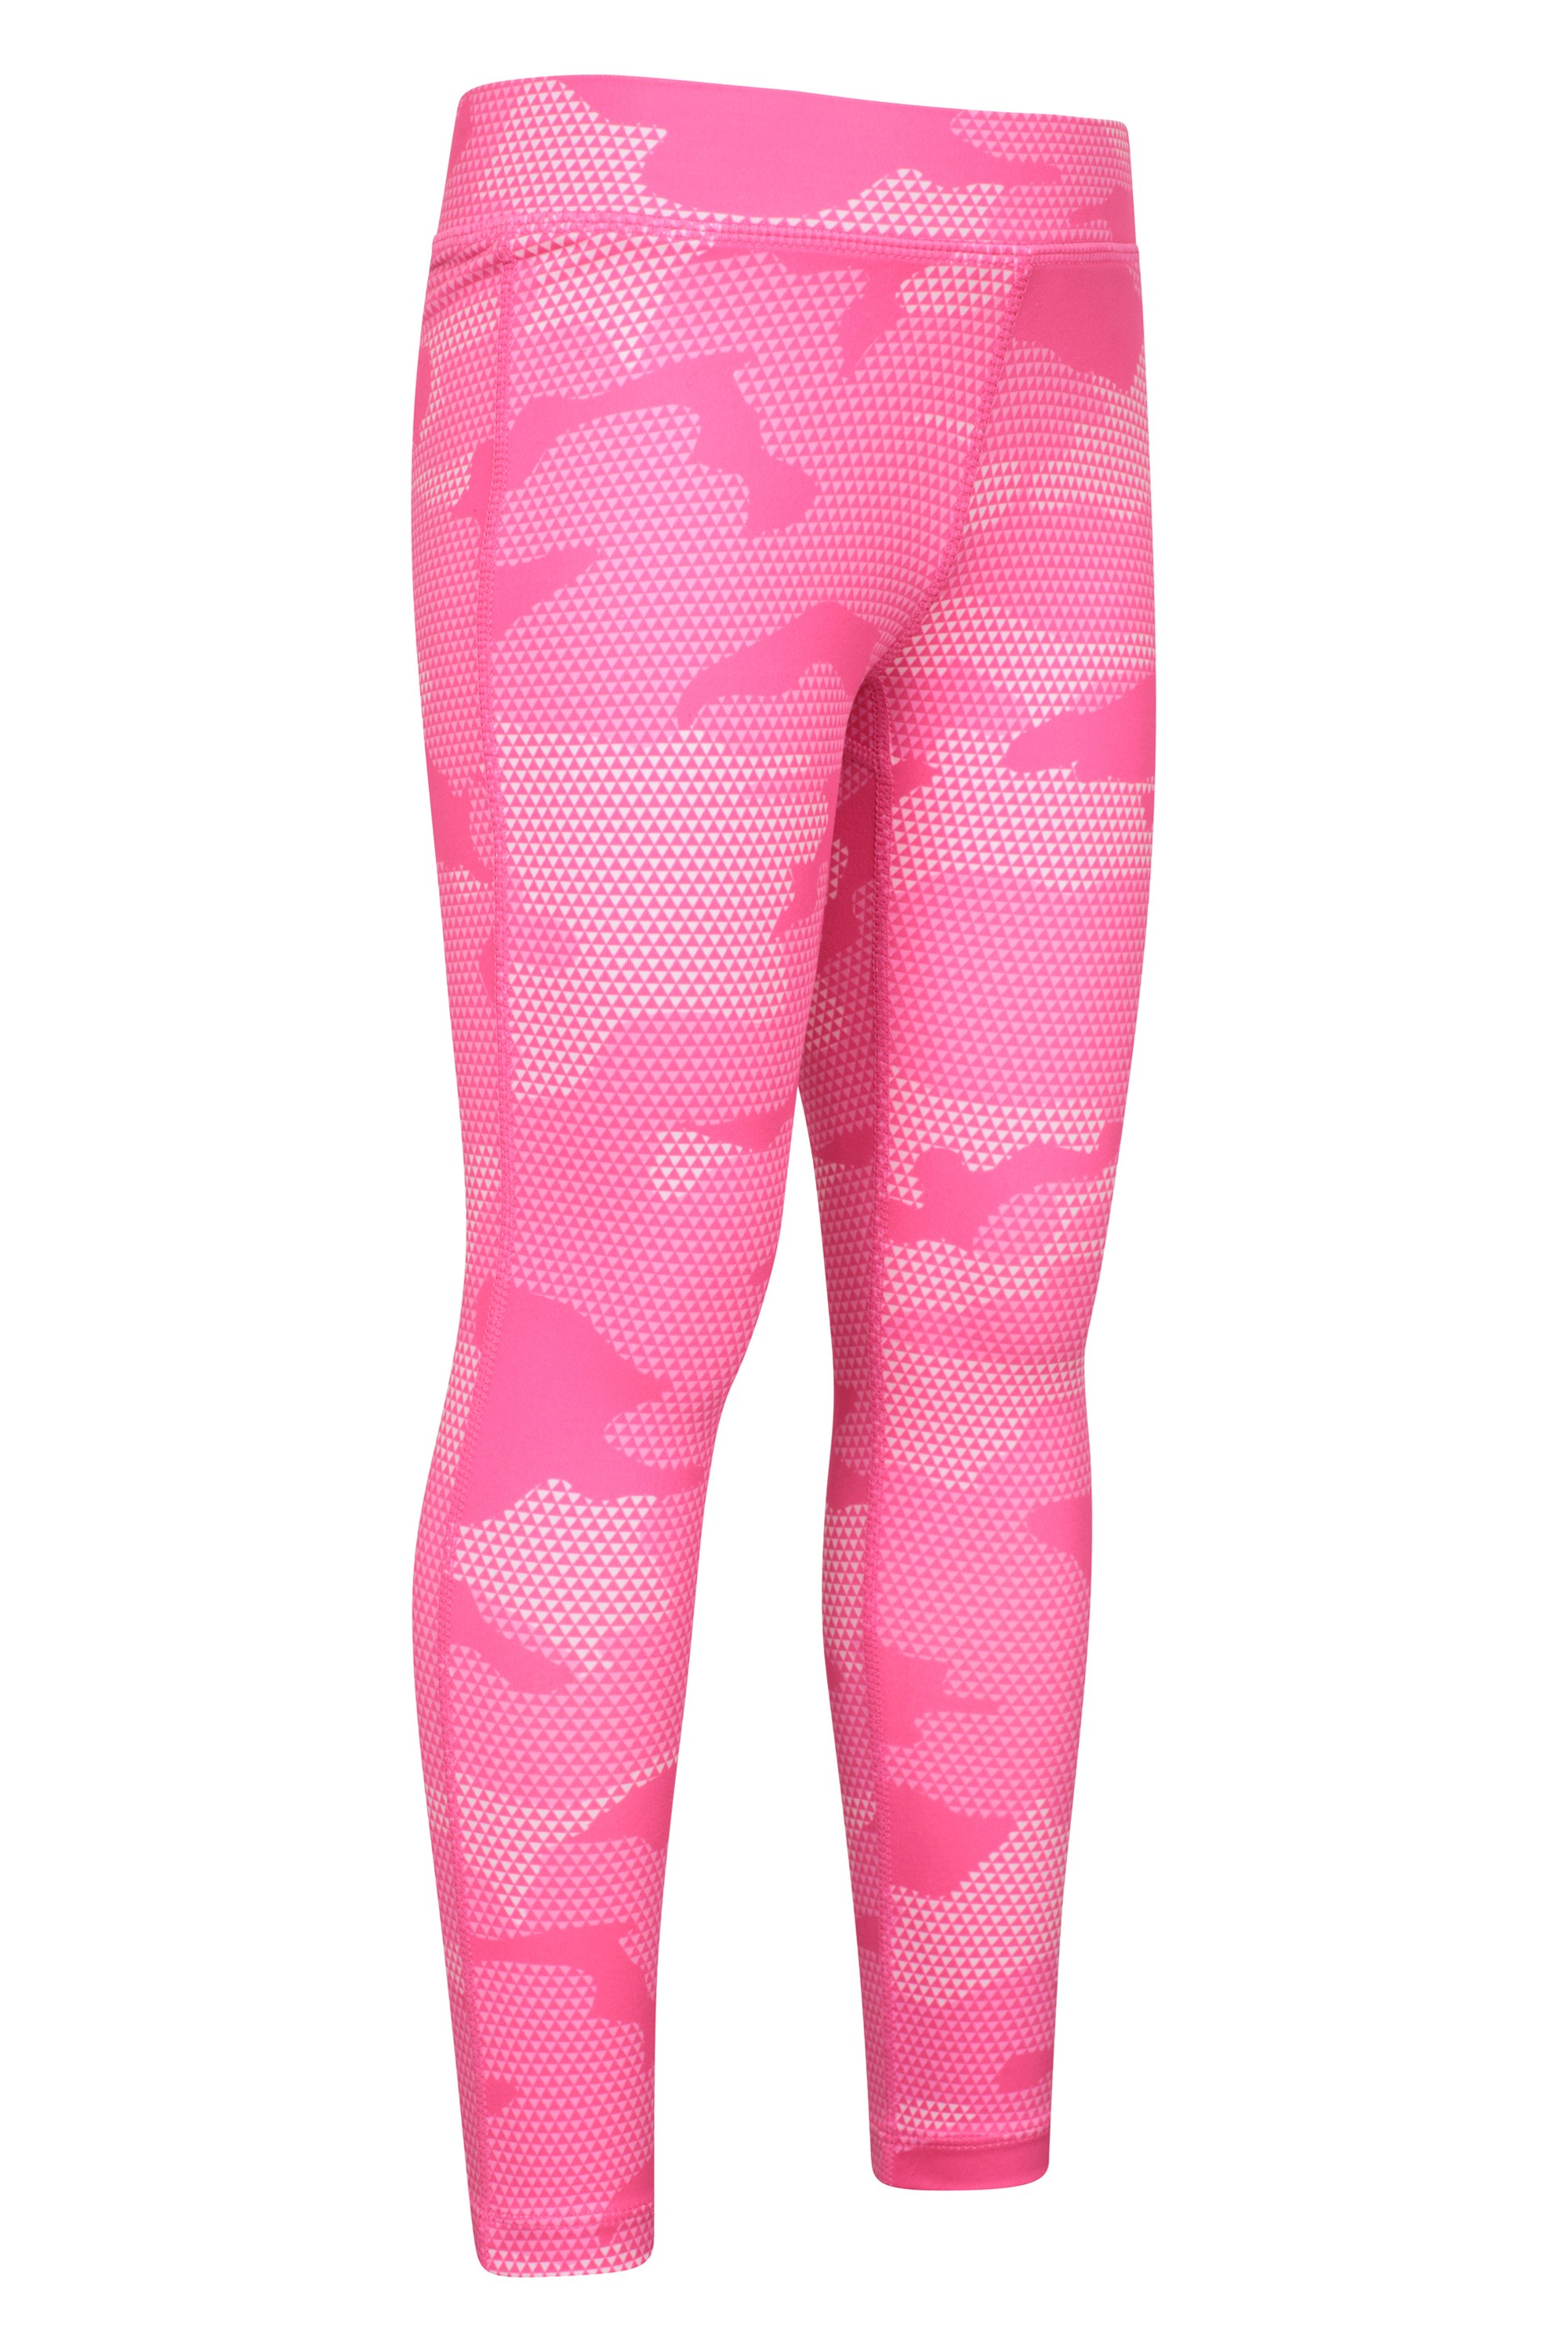 children's padded cycling tights